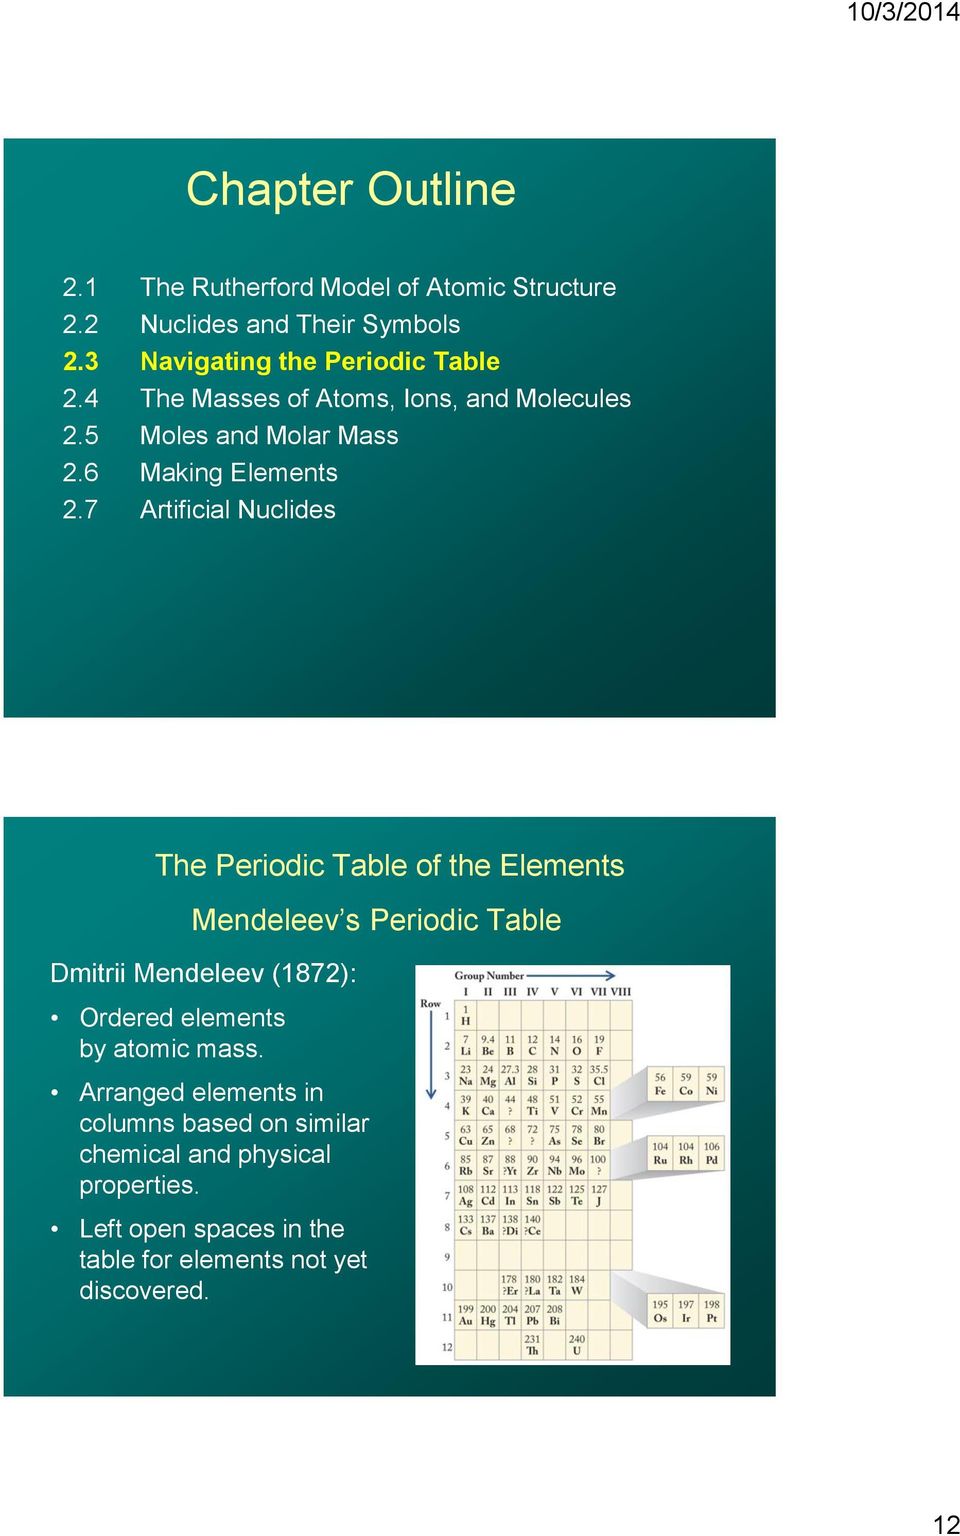 7 Artificial Nuclides The Periodic Table of the Elements Mendeleev s Periodic Table Dmitrii Mendeleev (1872): Ordered elements